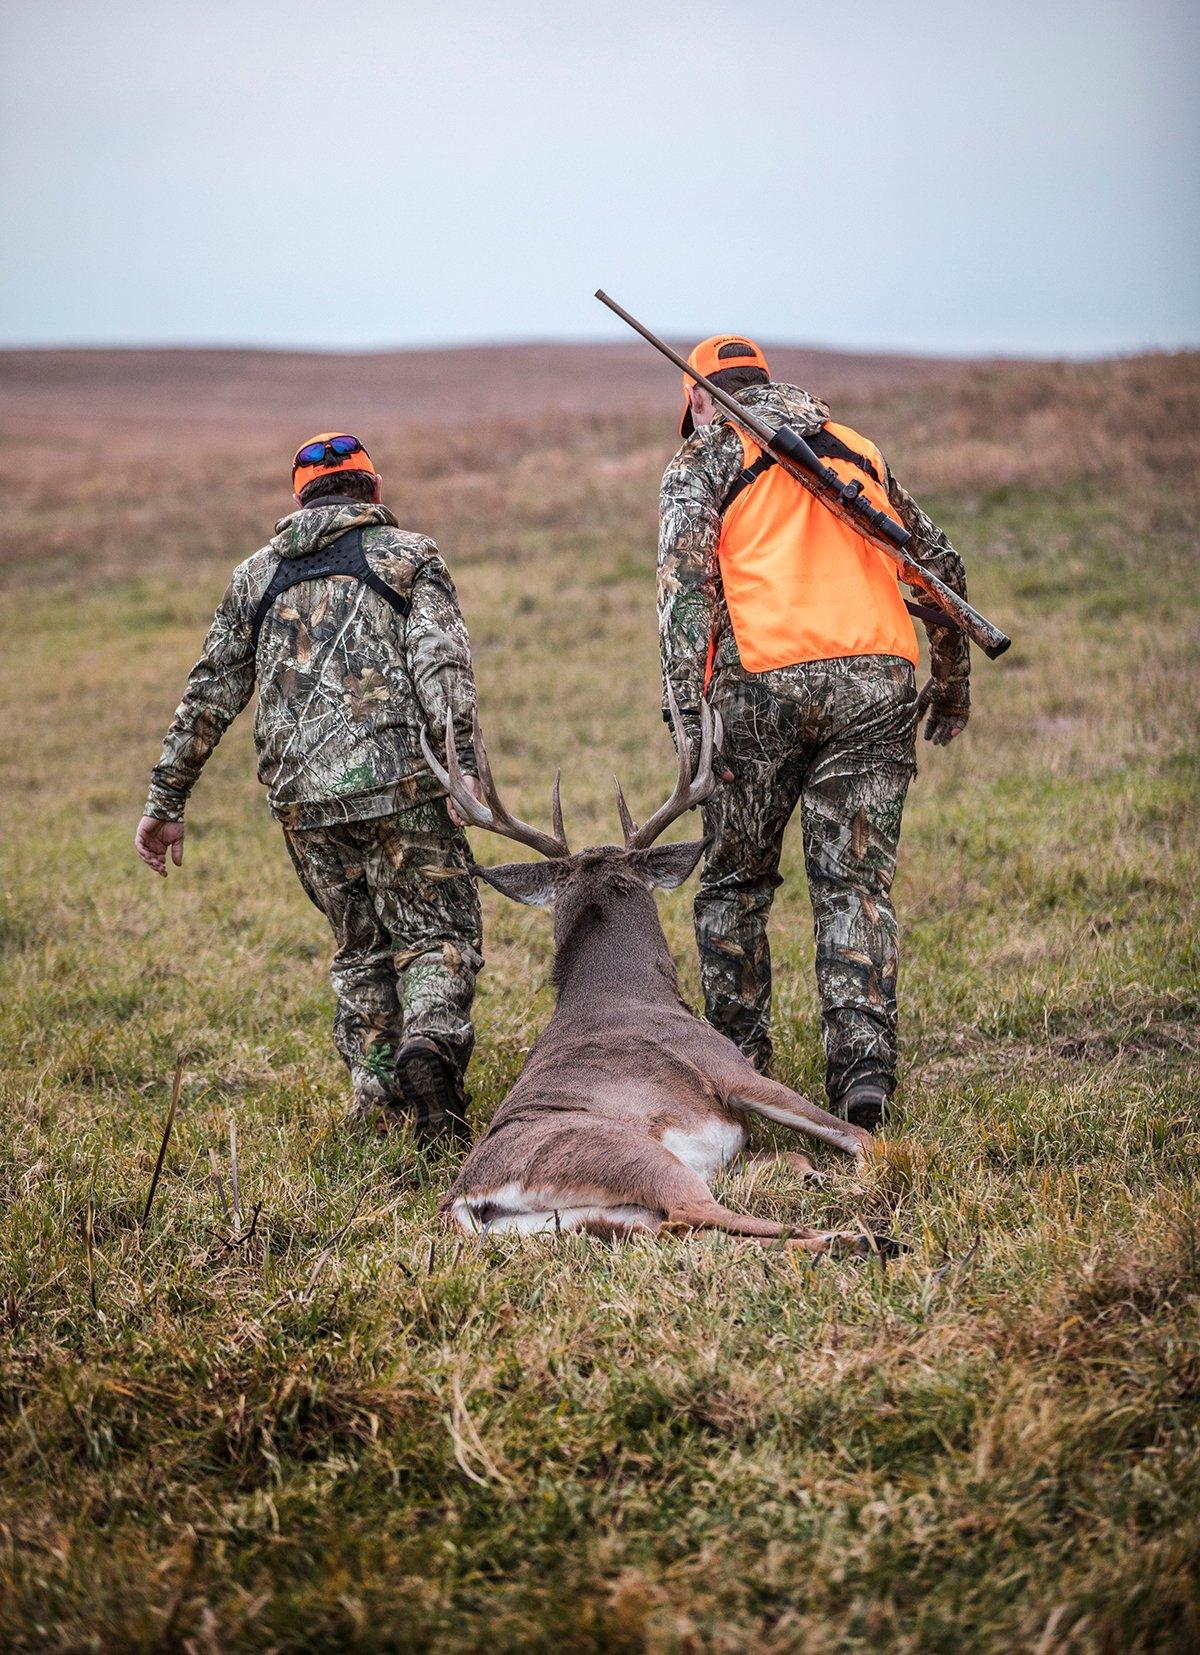 For guides who work hard, tips of 10 to 15% the hunt price are standard. Realtree Media Image